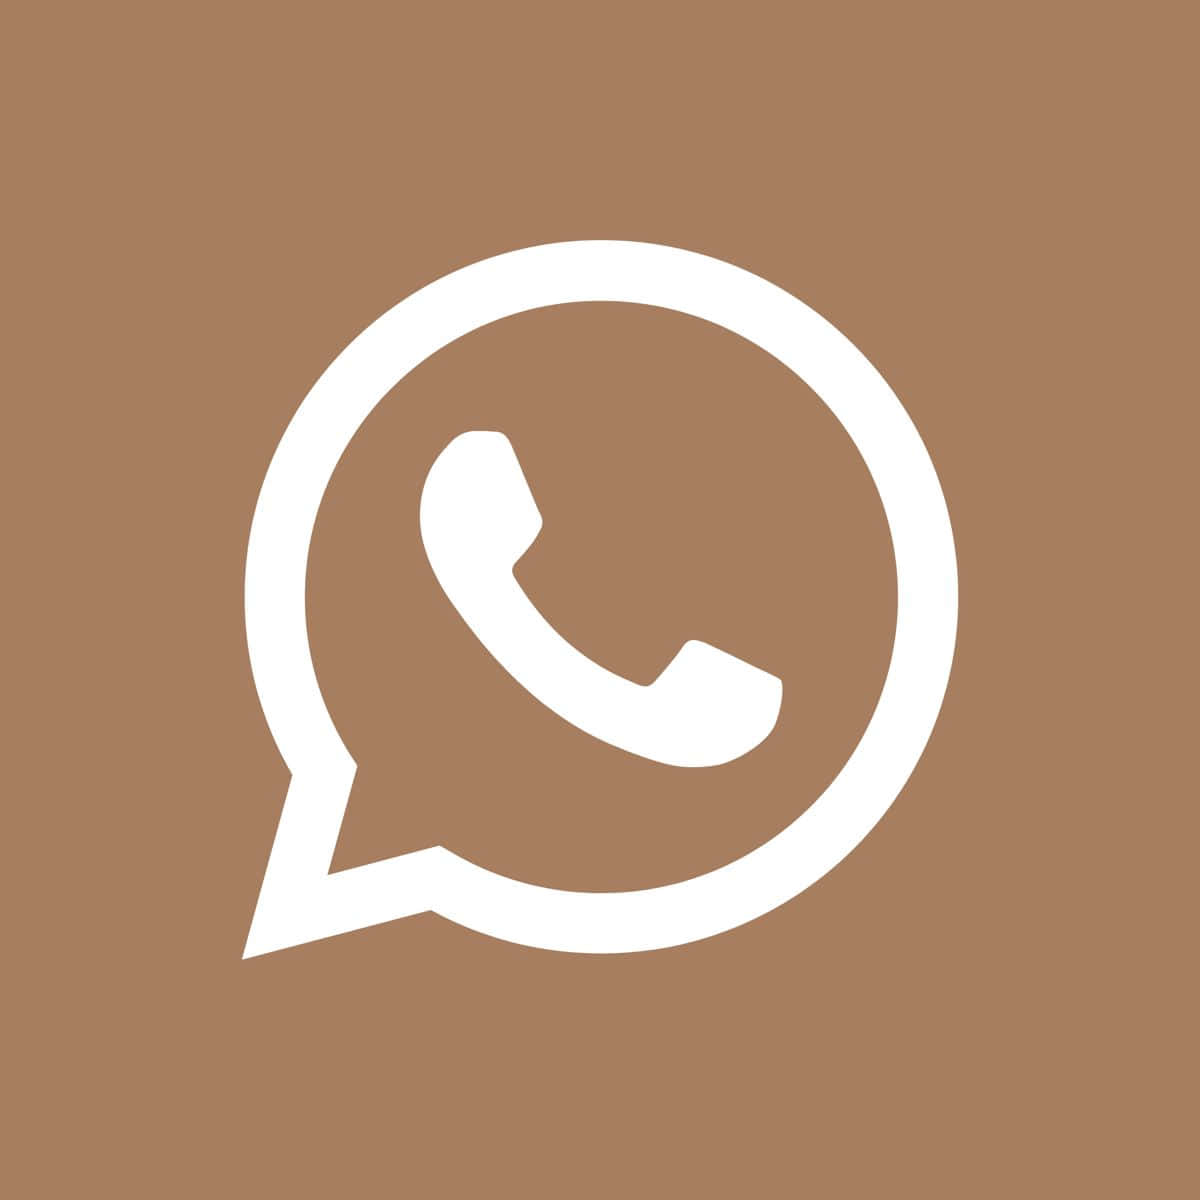 Whatsapp Icon On A Brown Background